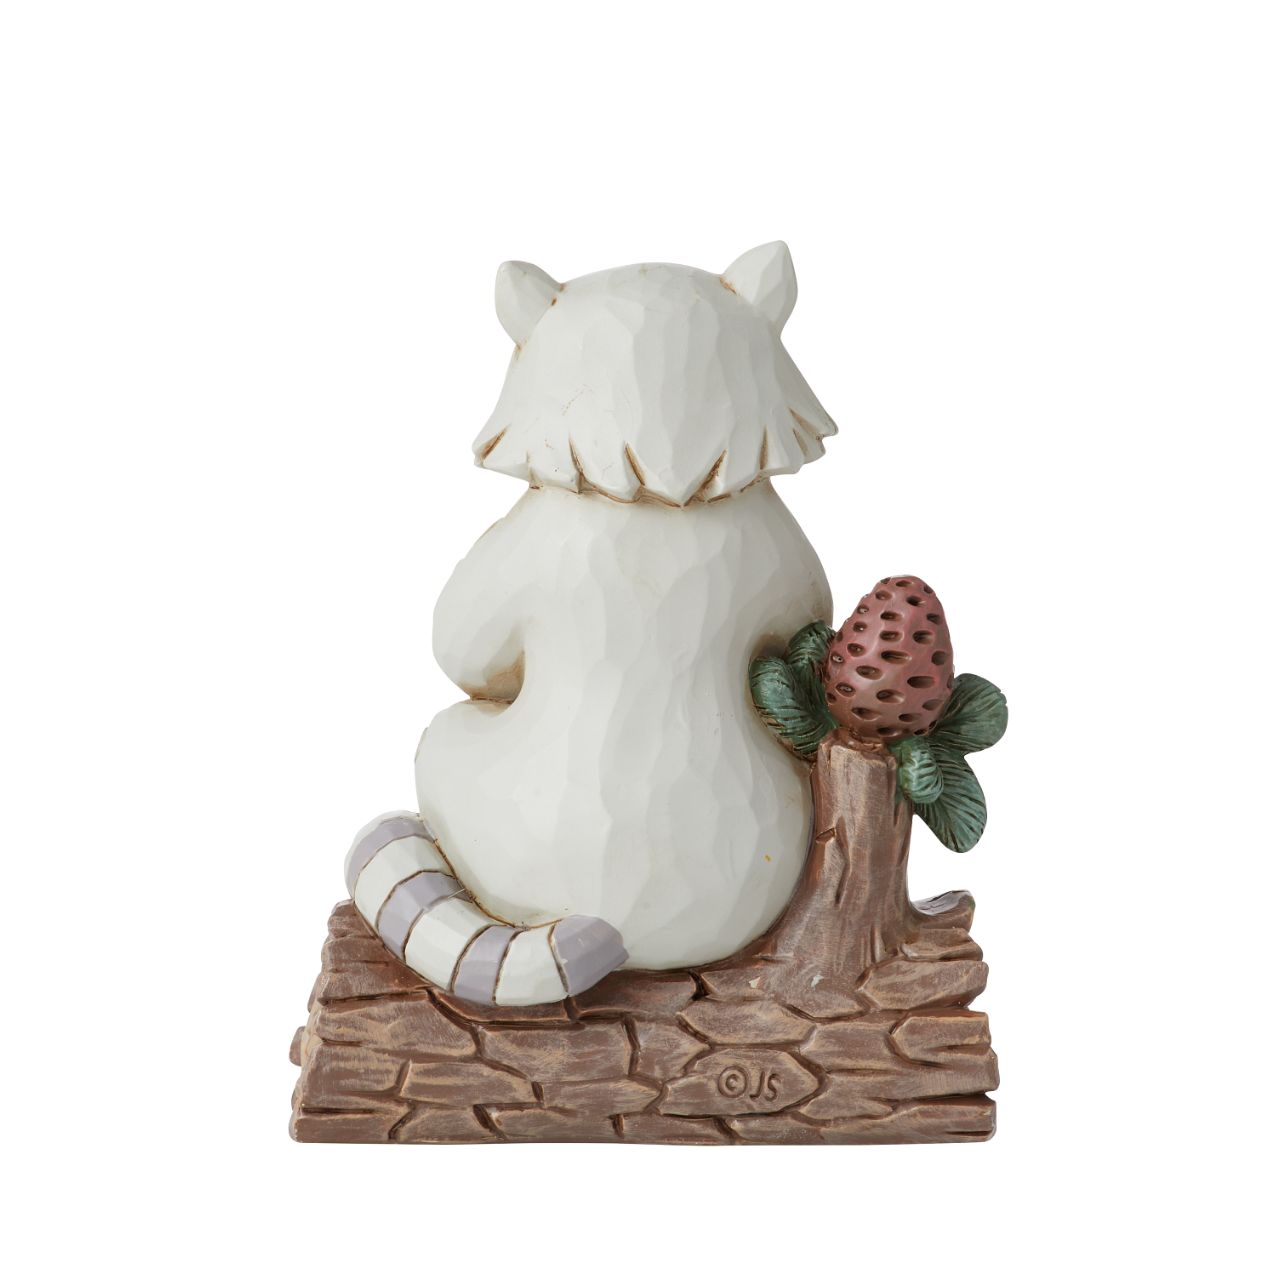 Jim Shore Raccoon with Pinecone Mini Figurine  The White Woodland Collection showcases Intricate Jim Shore designs, with soft neutral colour palette suitable for many styles of home décor. This magical collection on Minatare Figurines is a perfect gift for anyone wanting to start a White Woodland Collection.